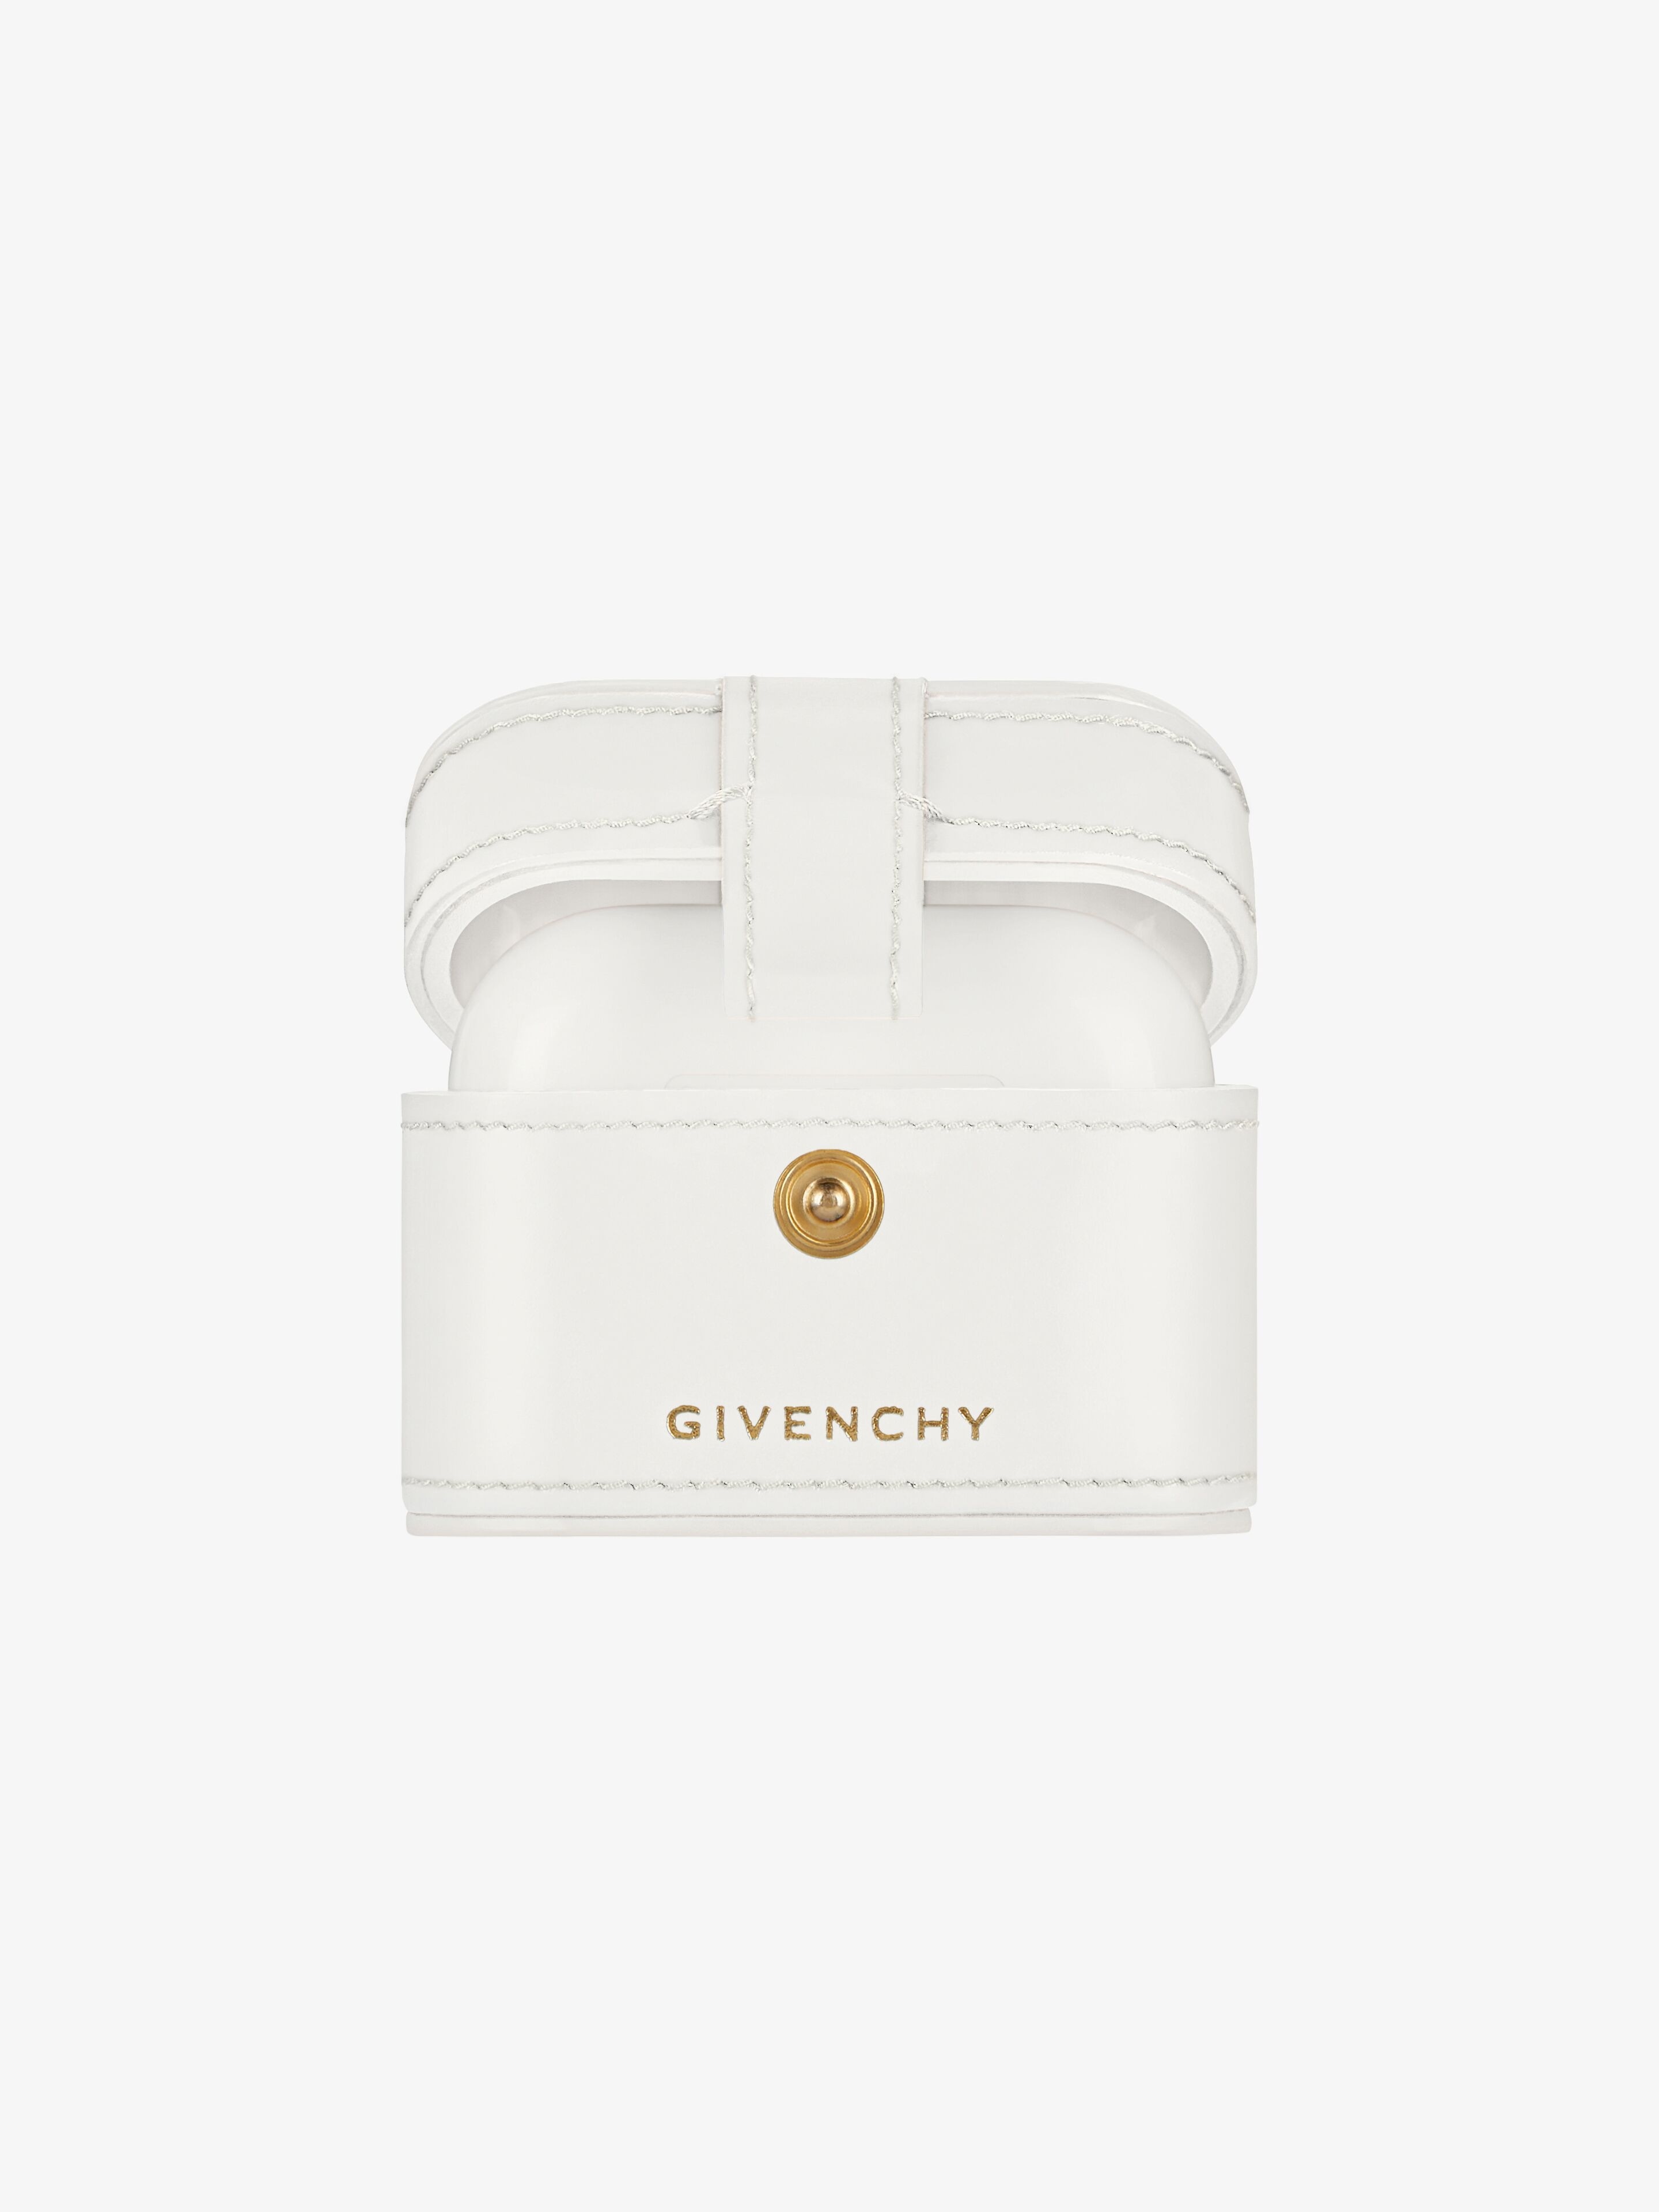 GIVENCHY AIRPODS PRO HOLDER CASE IN LEATHER - 2